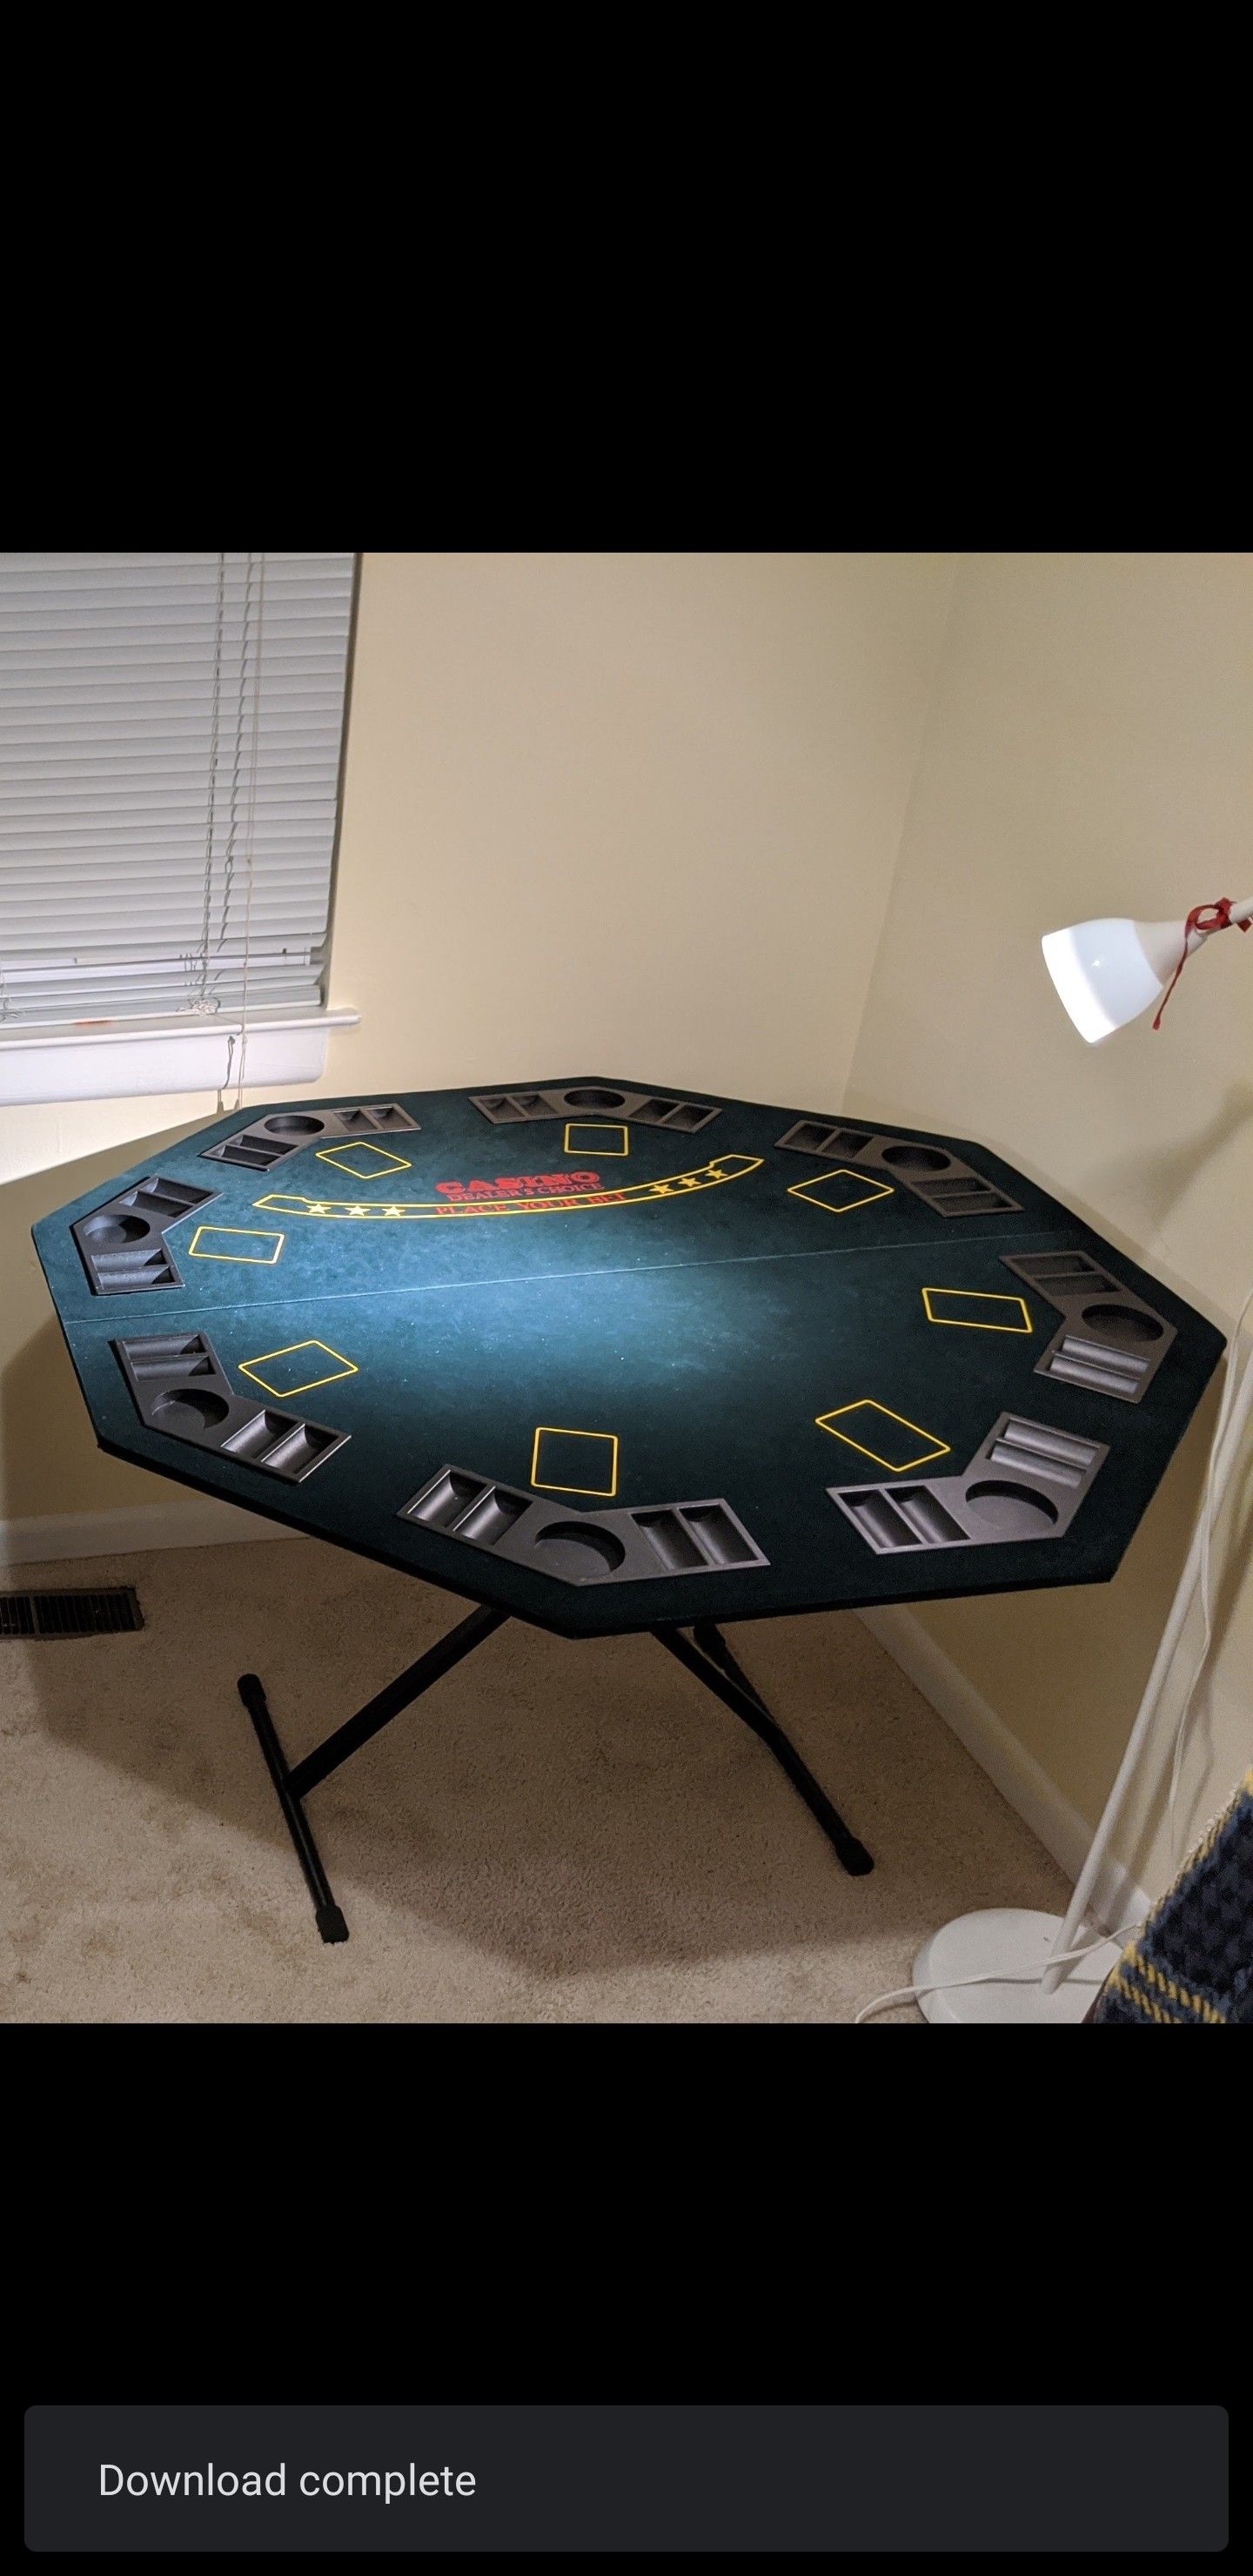 Poker table top and chips in suitcase